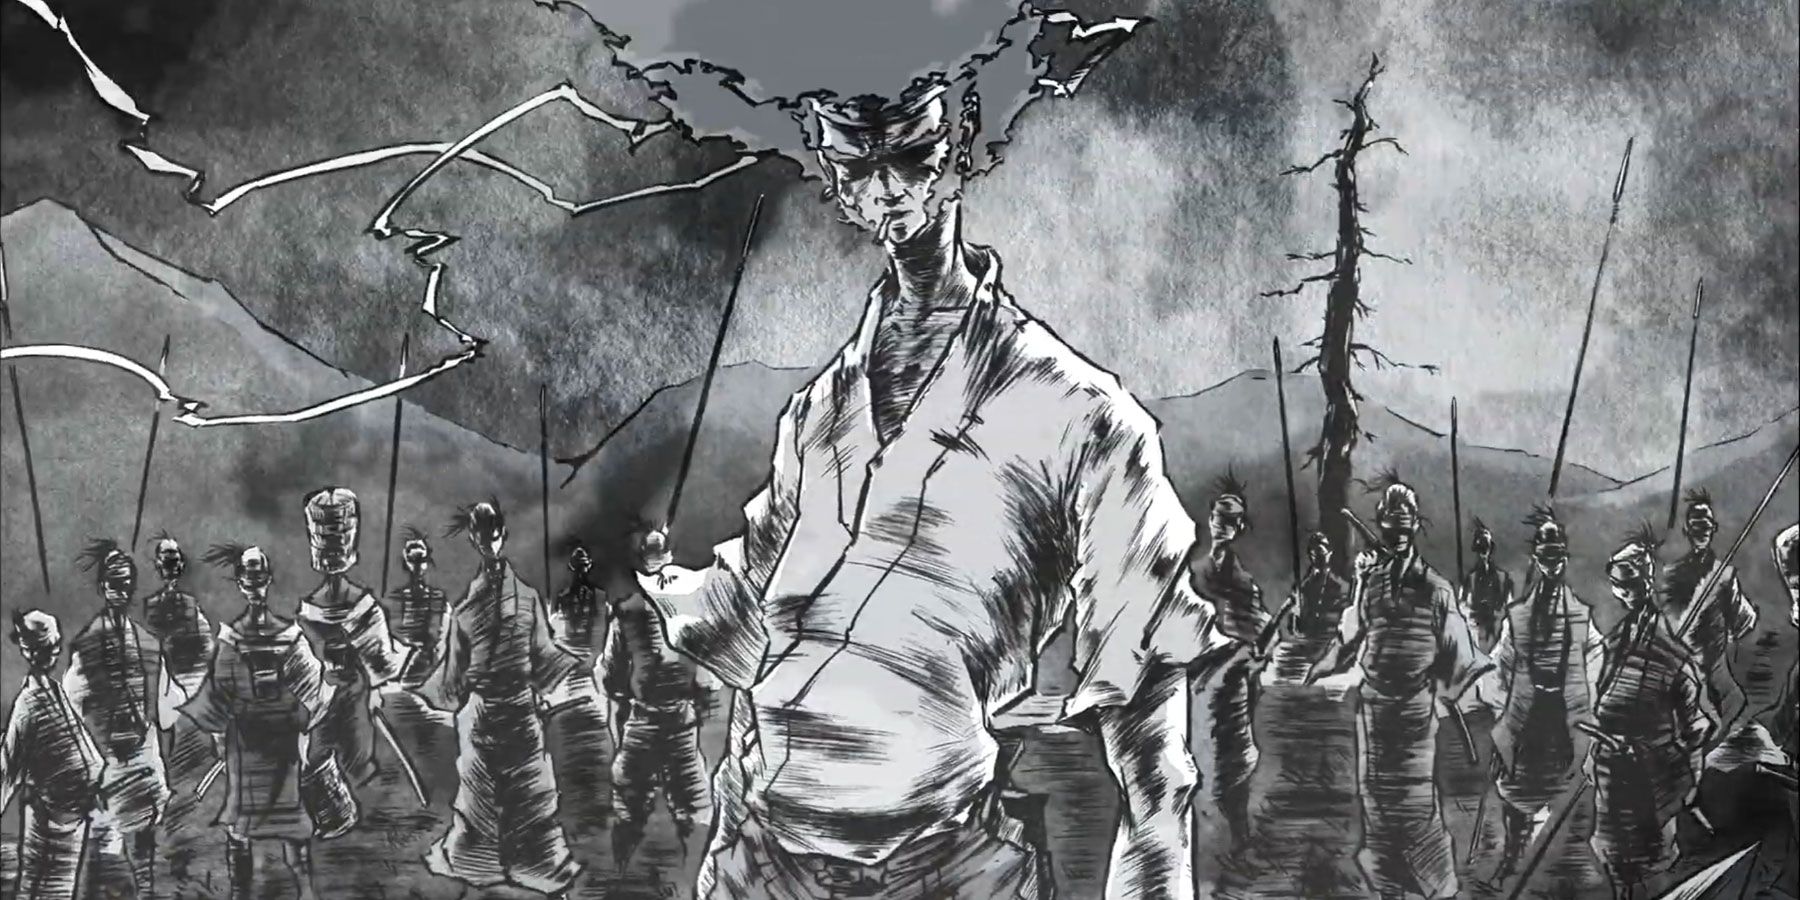 Afro Samurai Features New Director’s Re-Release Footage